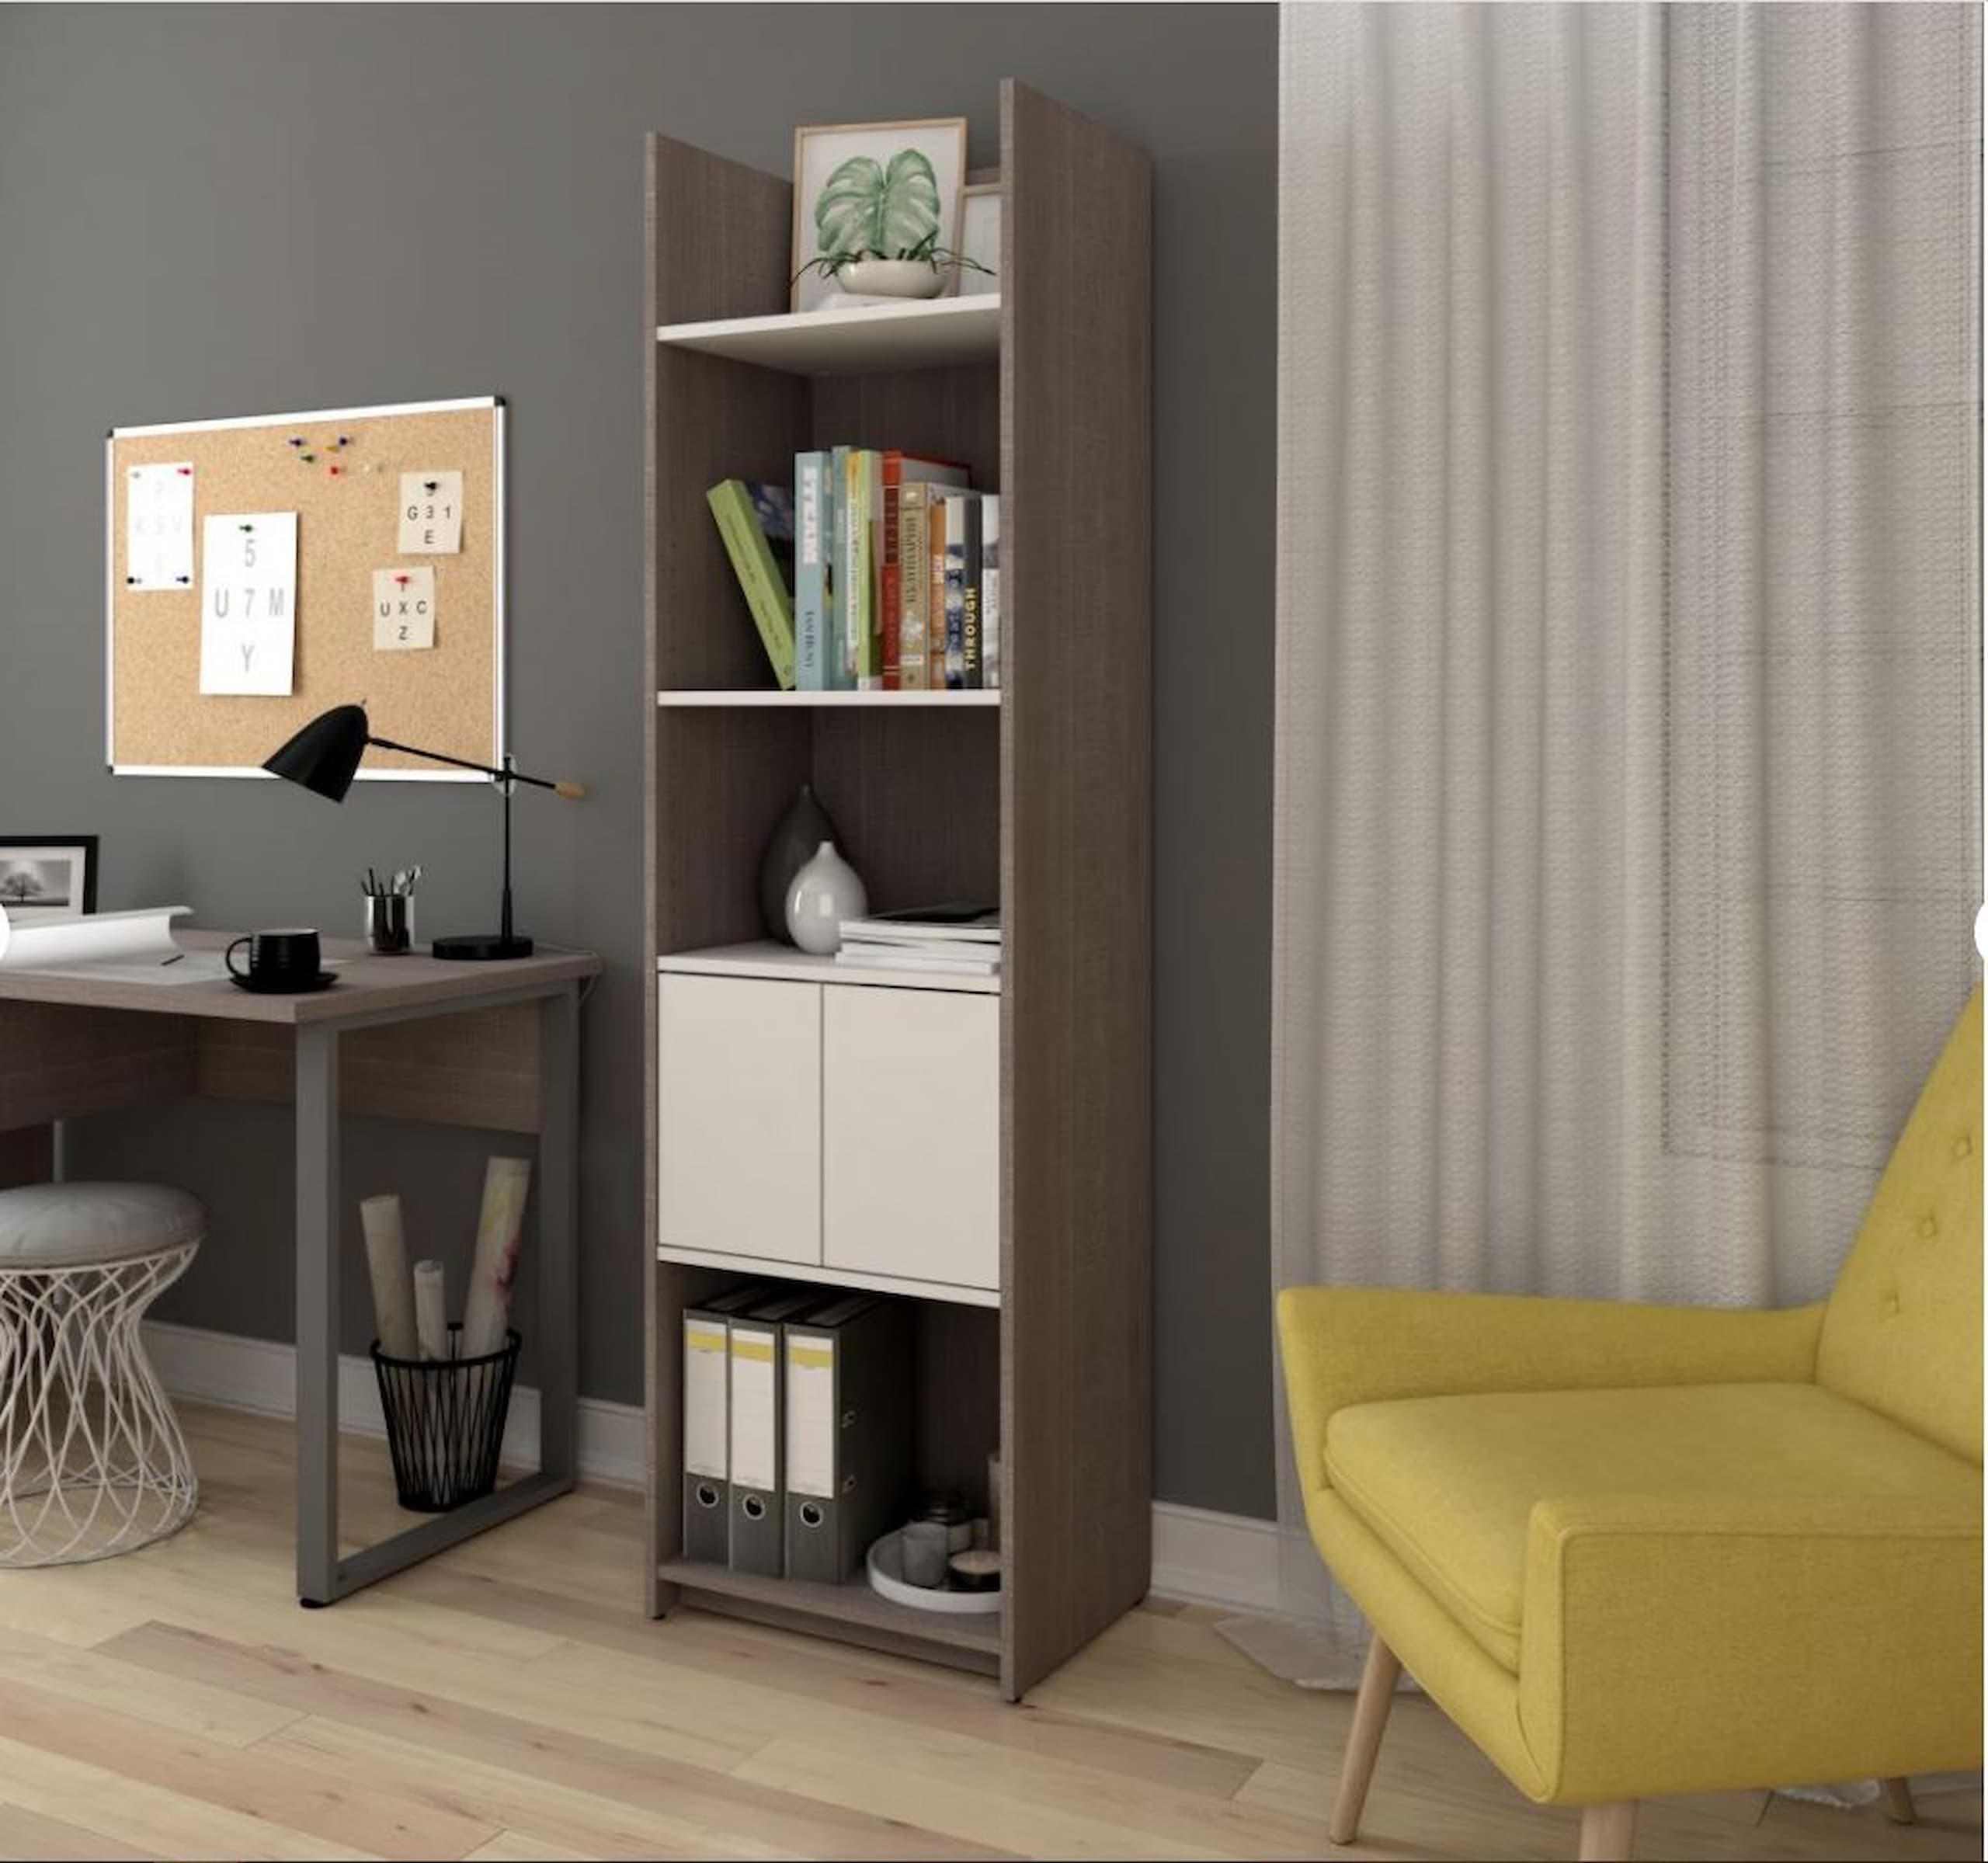 Two-tone narrow shelving unit in a home office